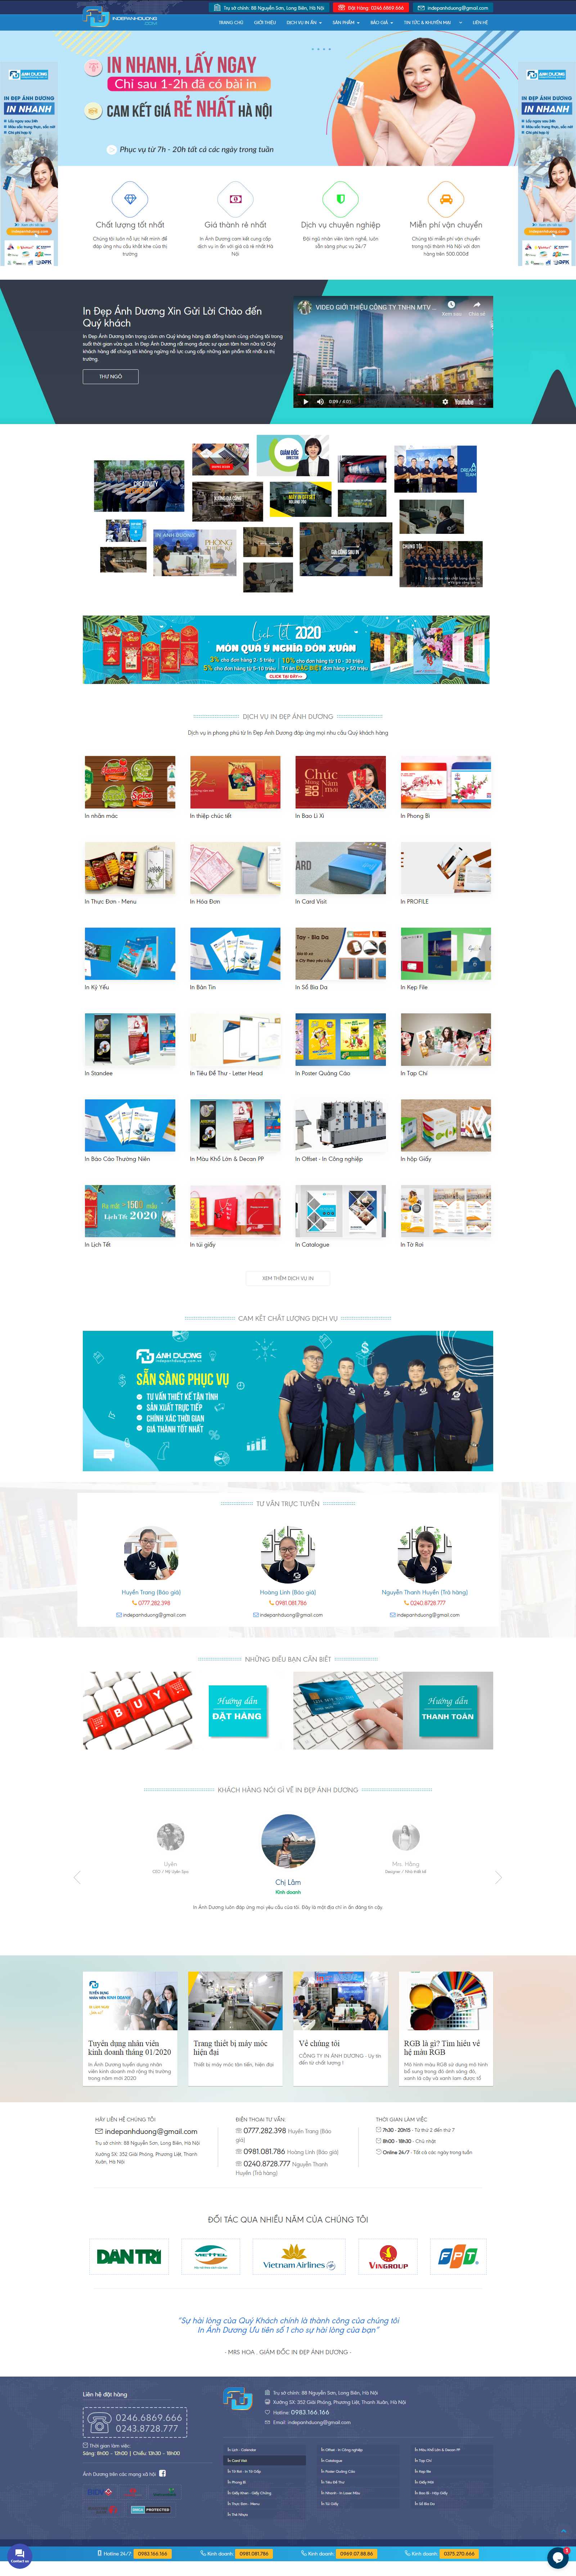 Thiết kế Website catalog - indepanhduong.com